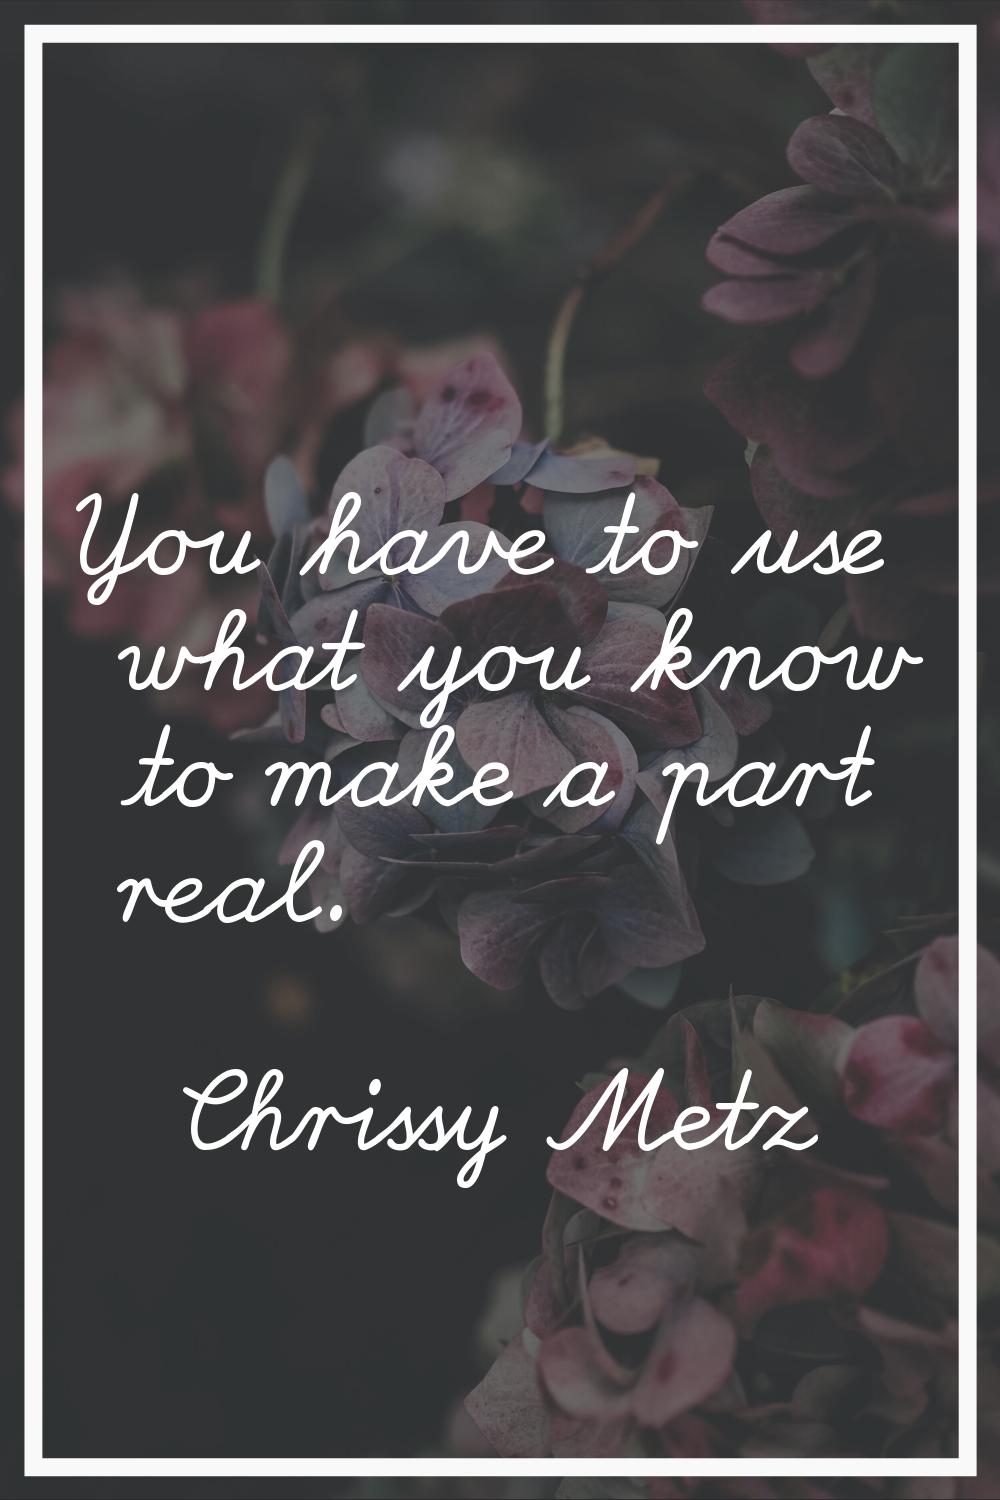 You have to use what you know to make a part real.